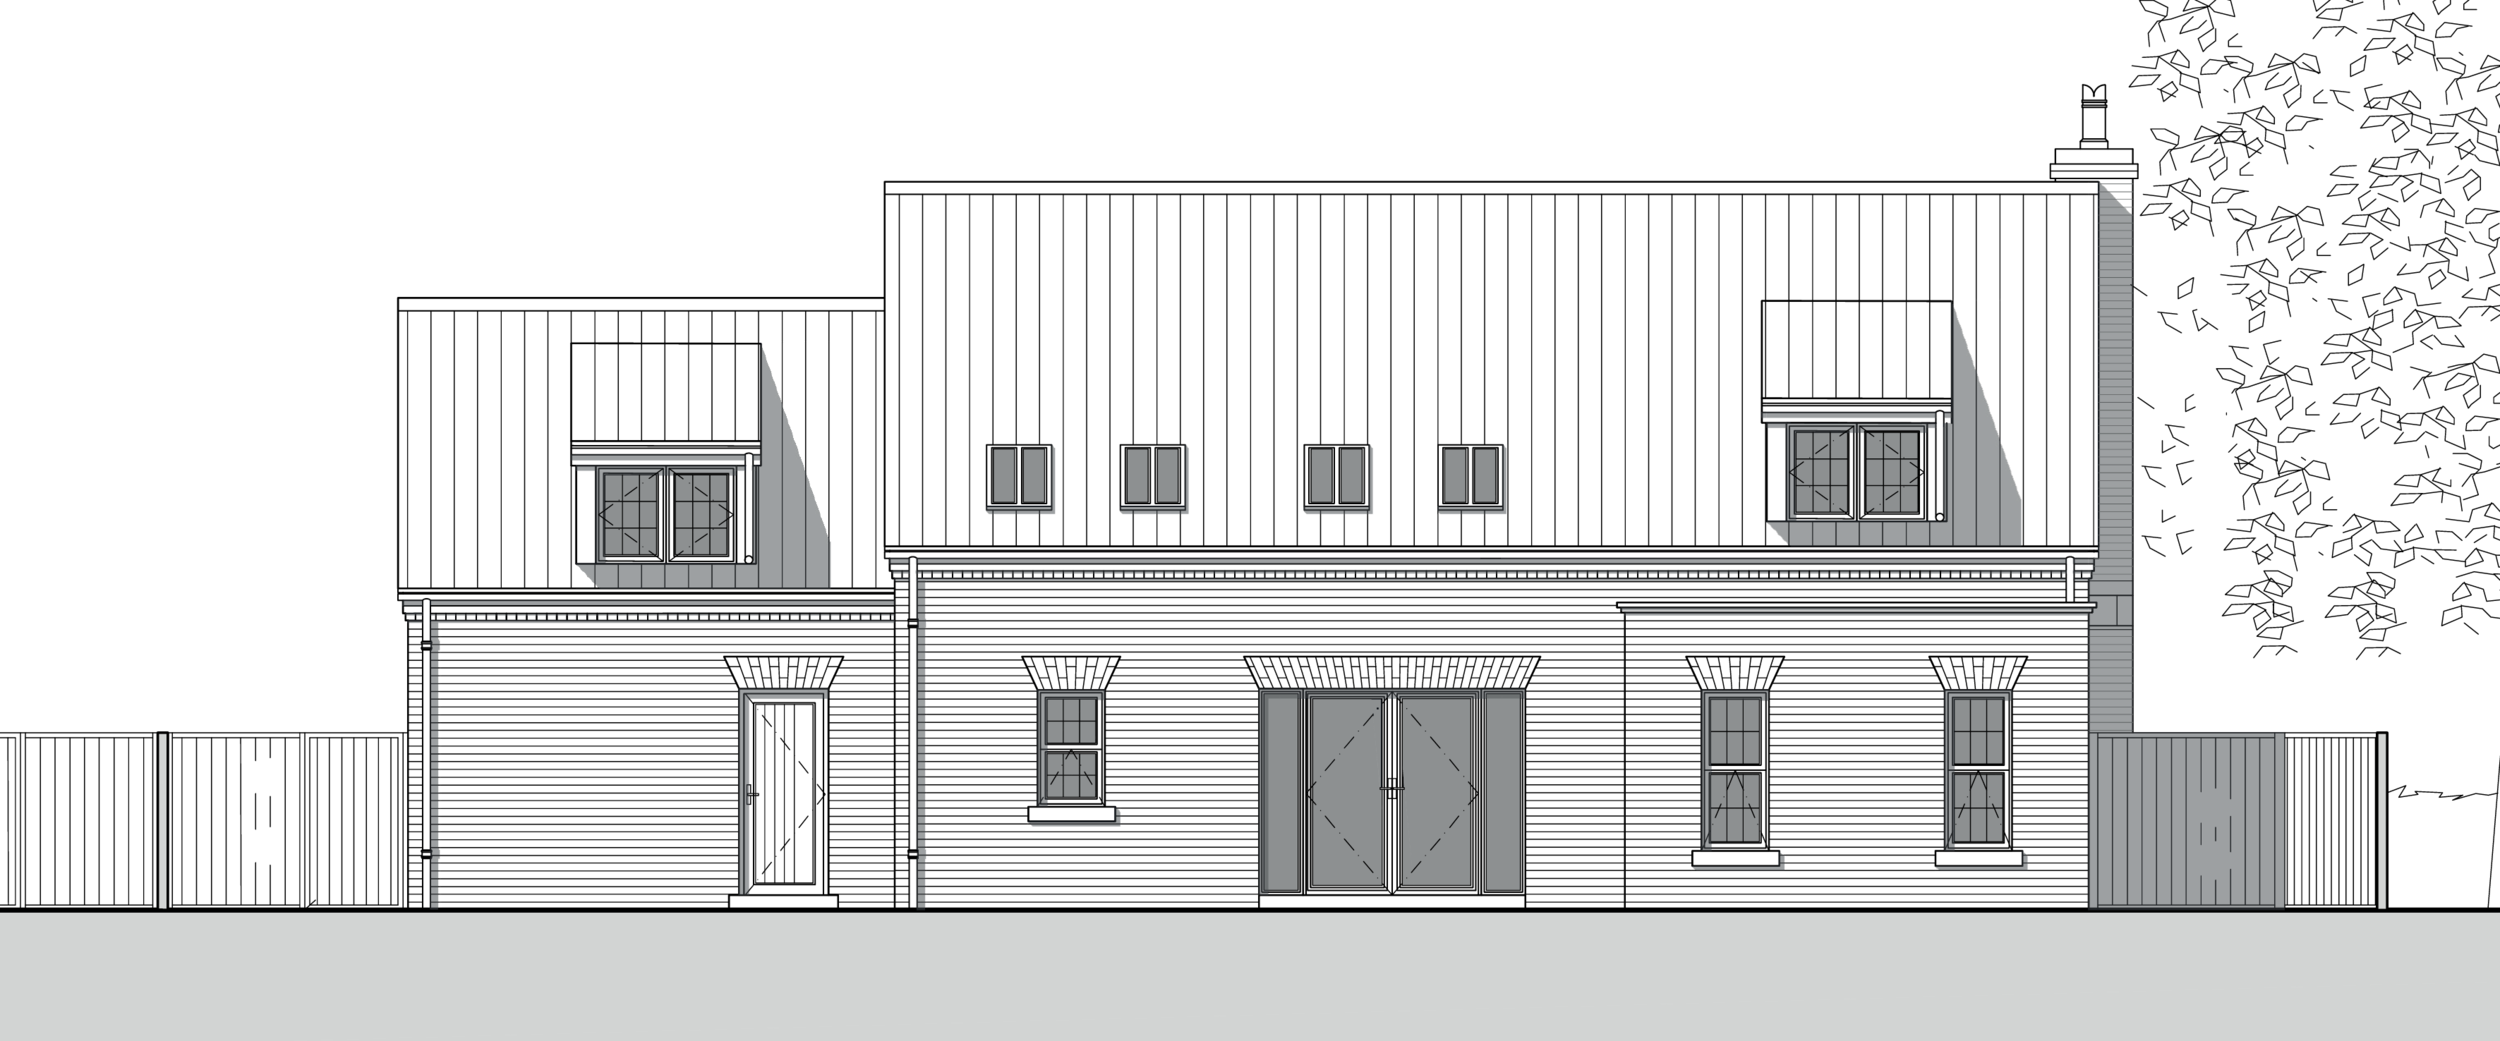 tockwith_elevations_york_house2.png